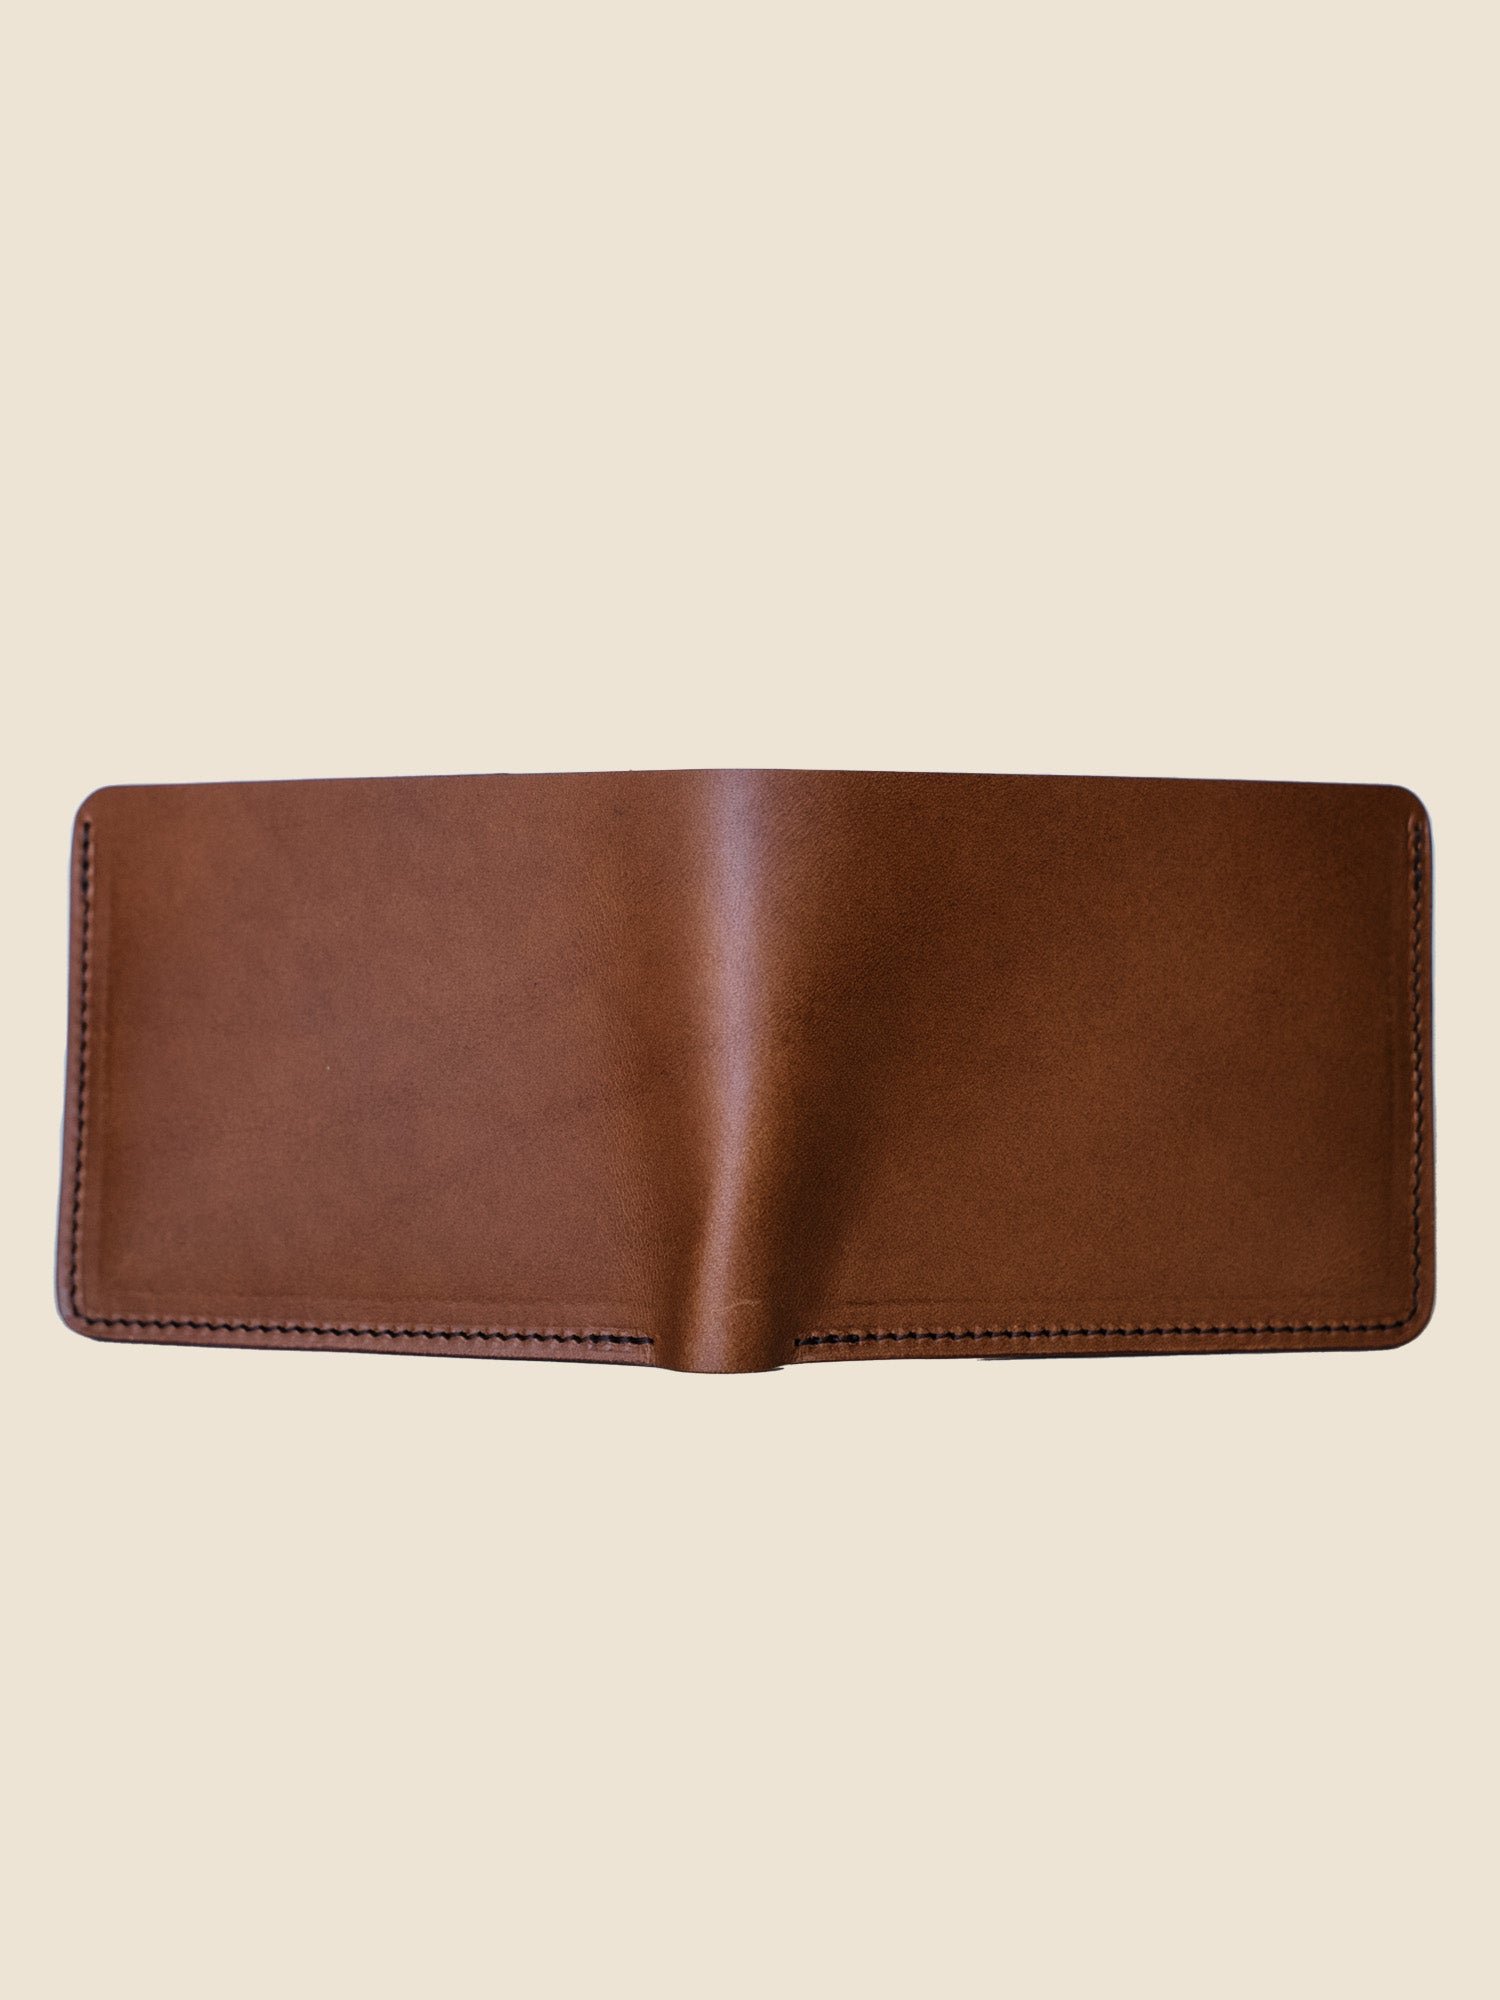 Handcrafted Horween Leather Bifold Wallet | Loyal Stricklin